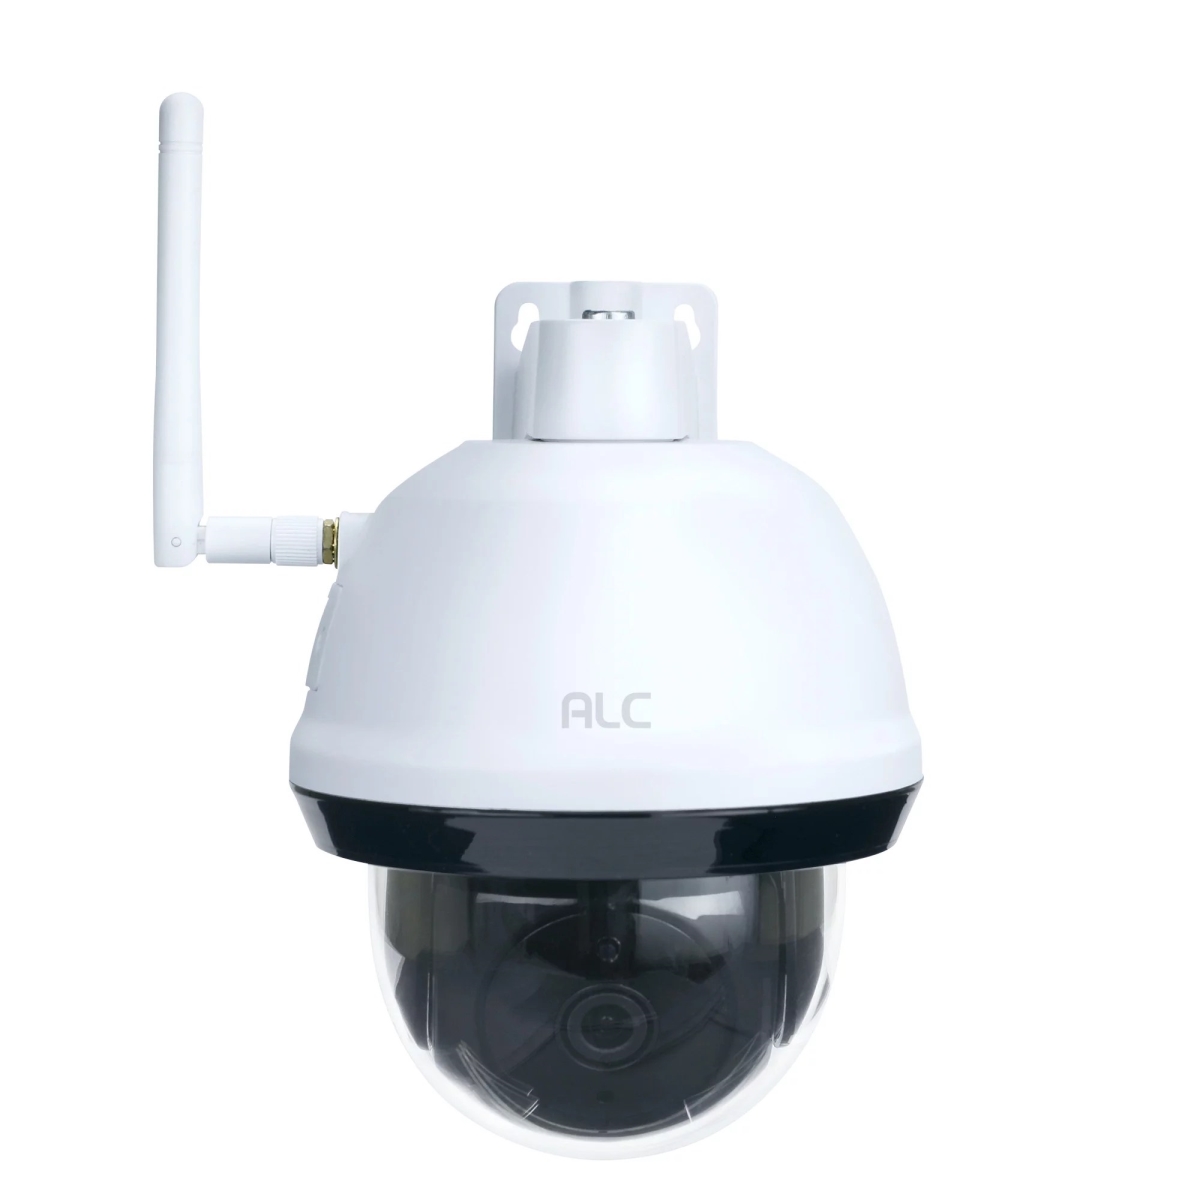 Picture of ALC ALC-AWF54 Outdoor Pan Tilt Wi-Fi Camera